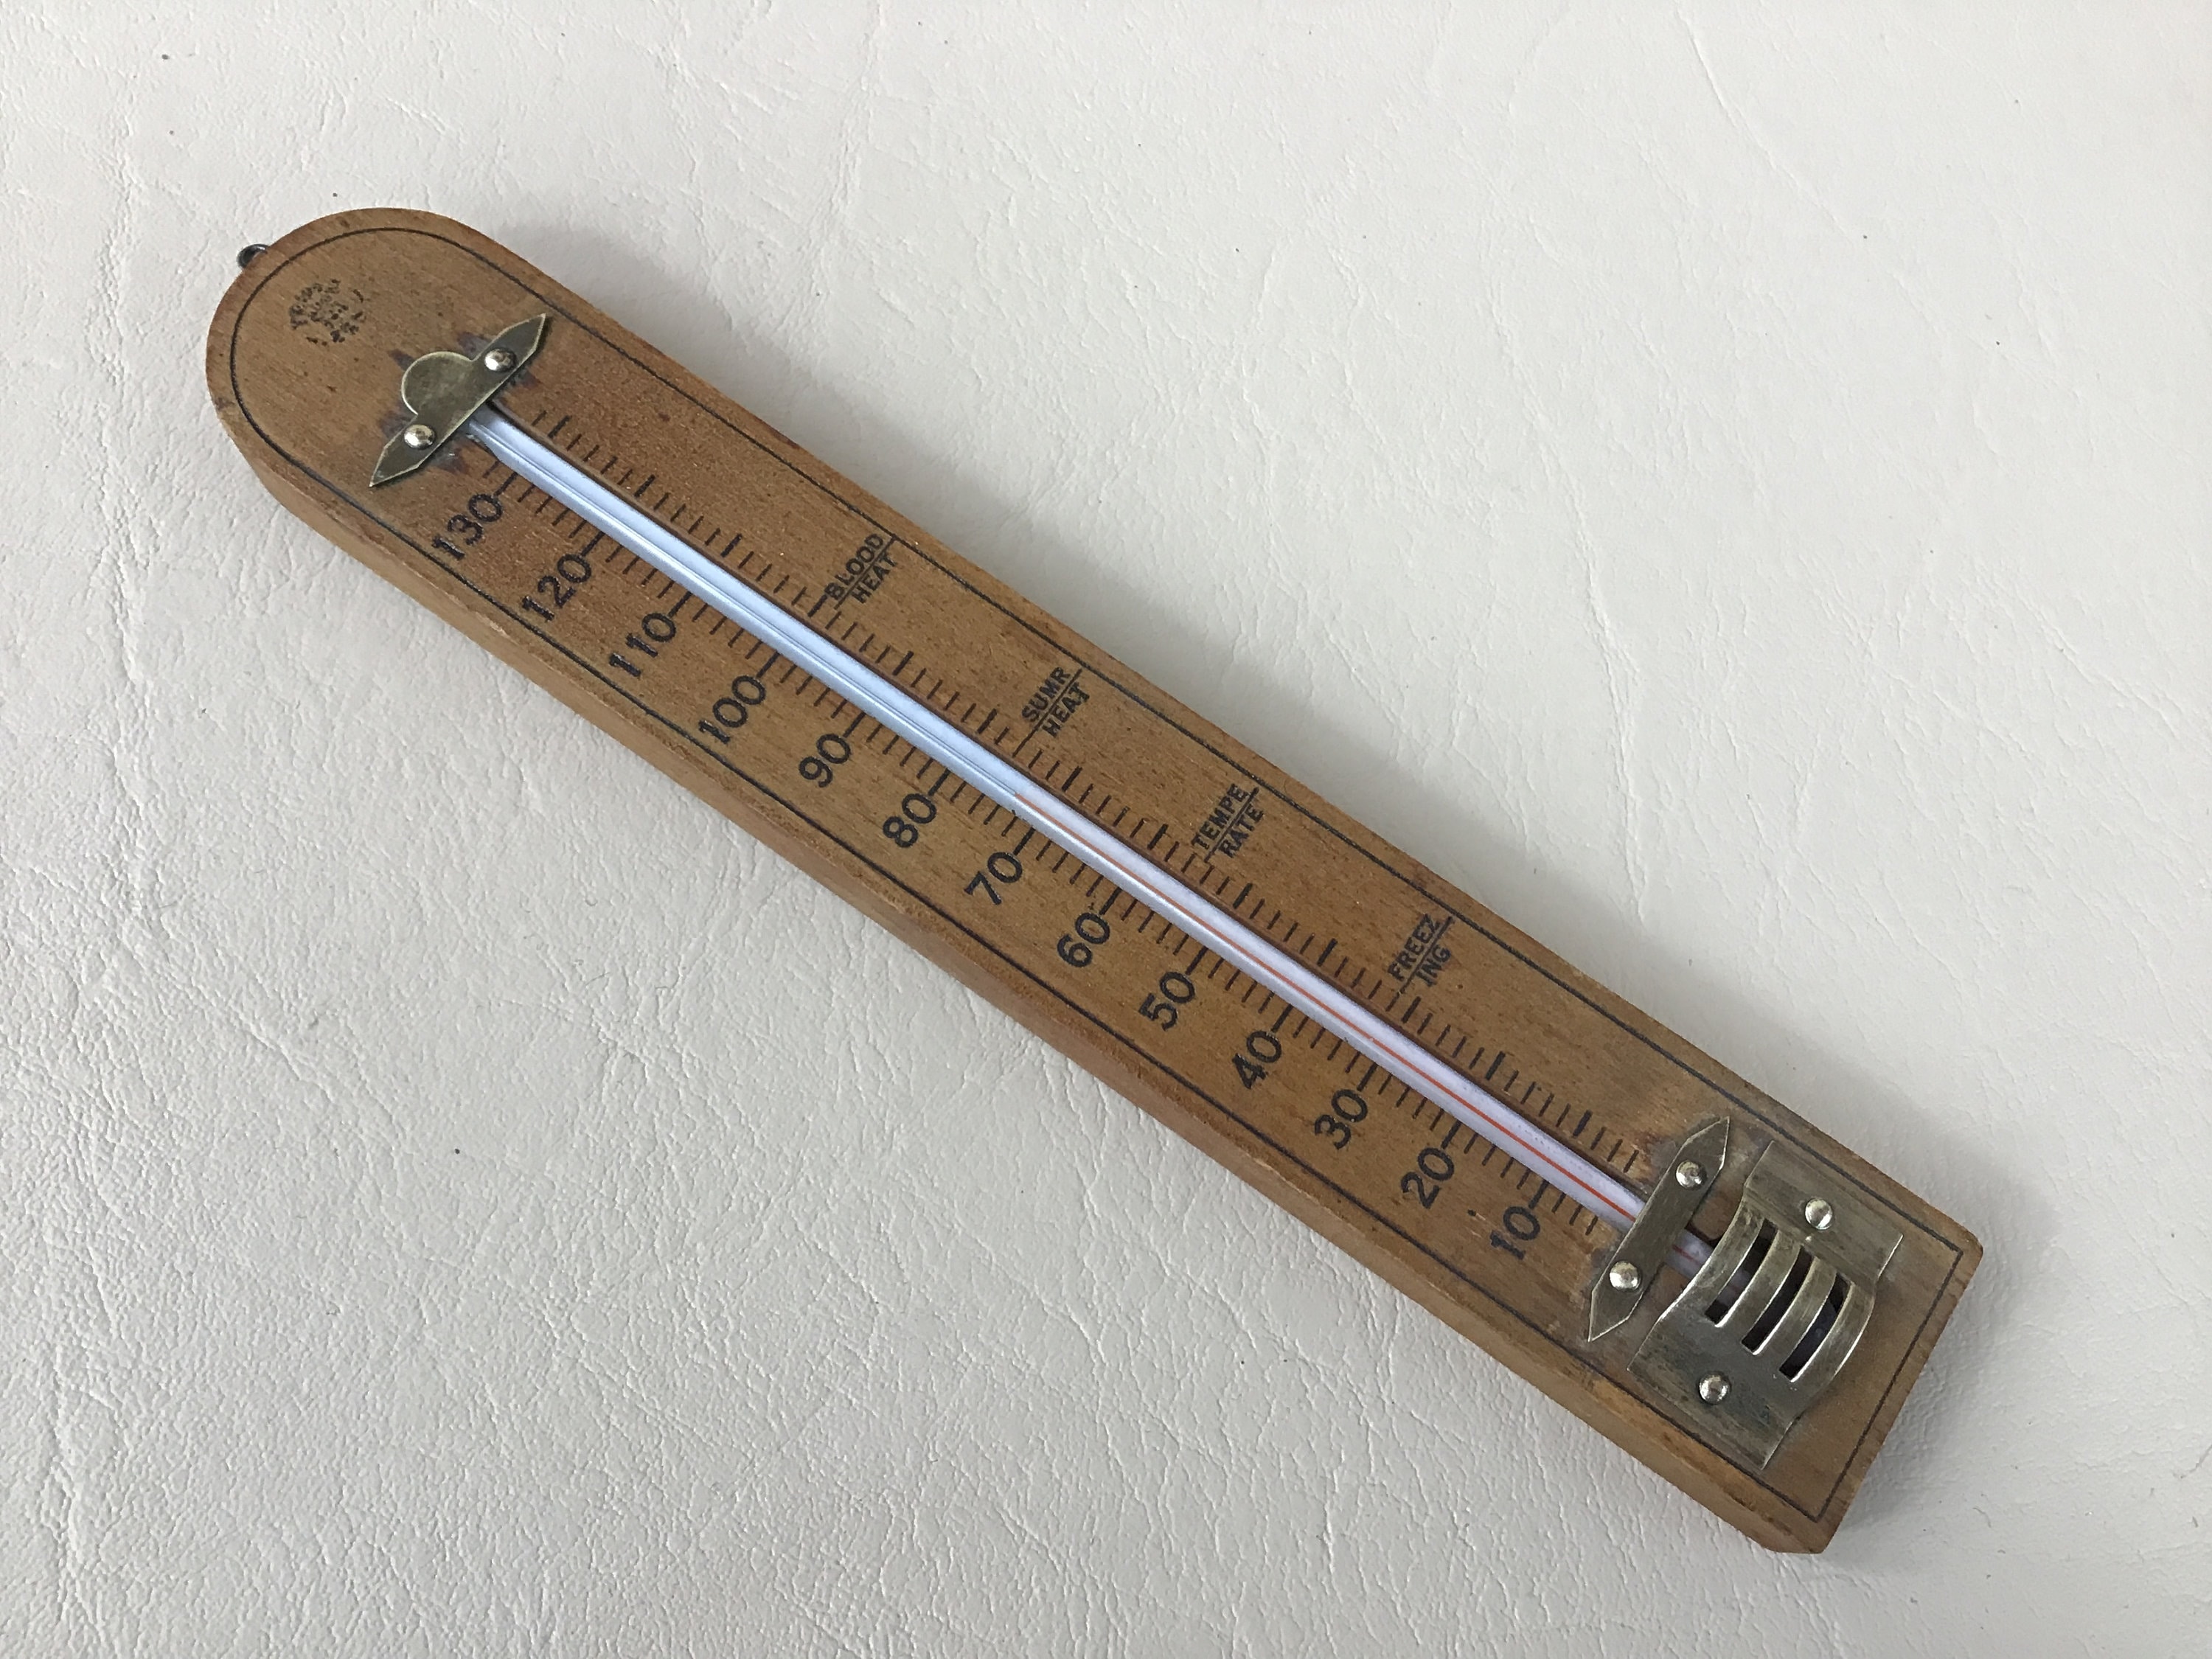 Mercury Thermometer for sale | Only 4 left at -70%